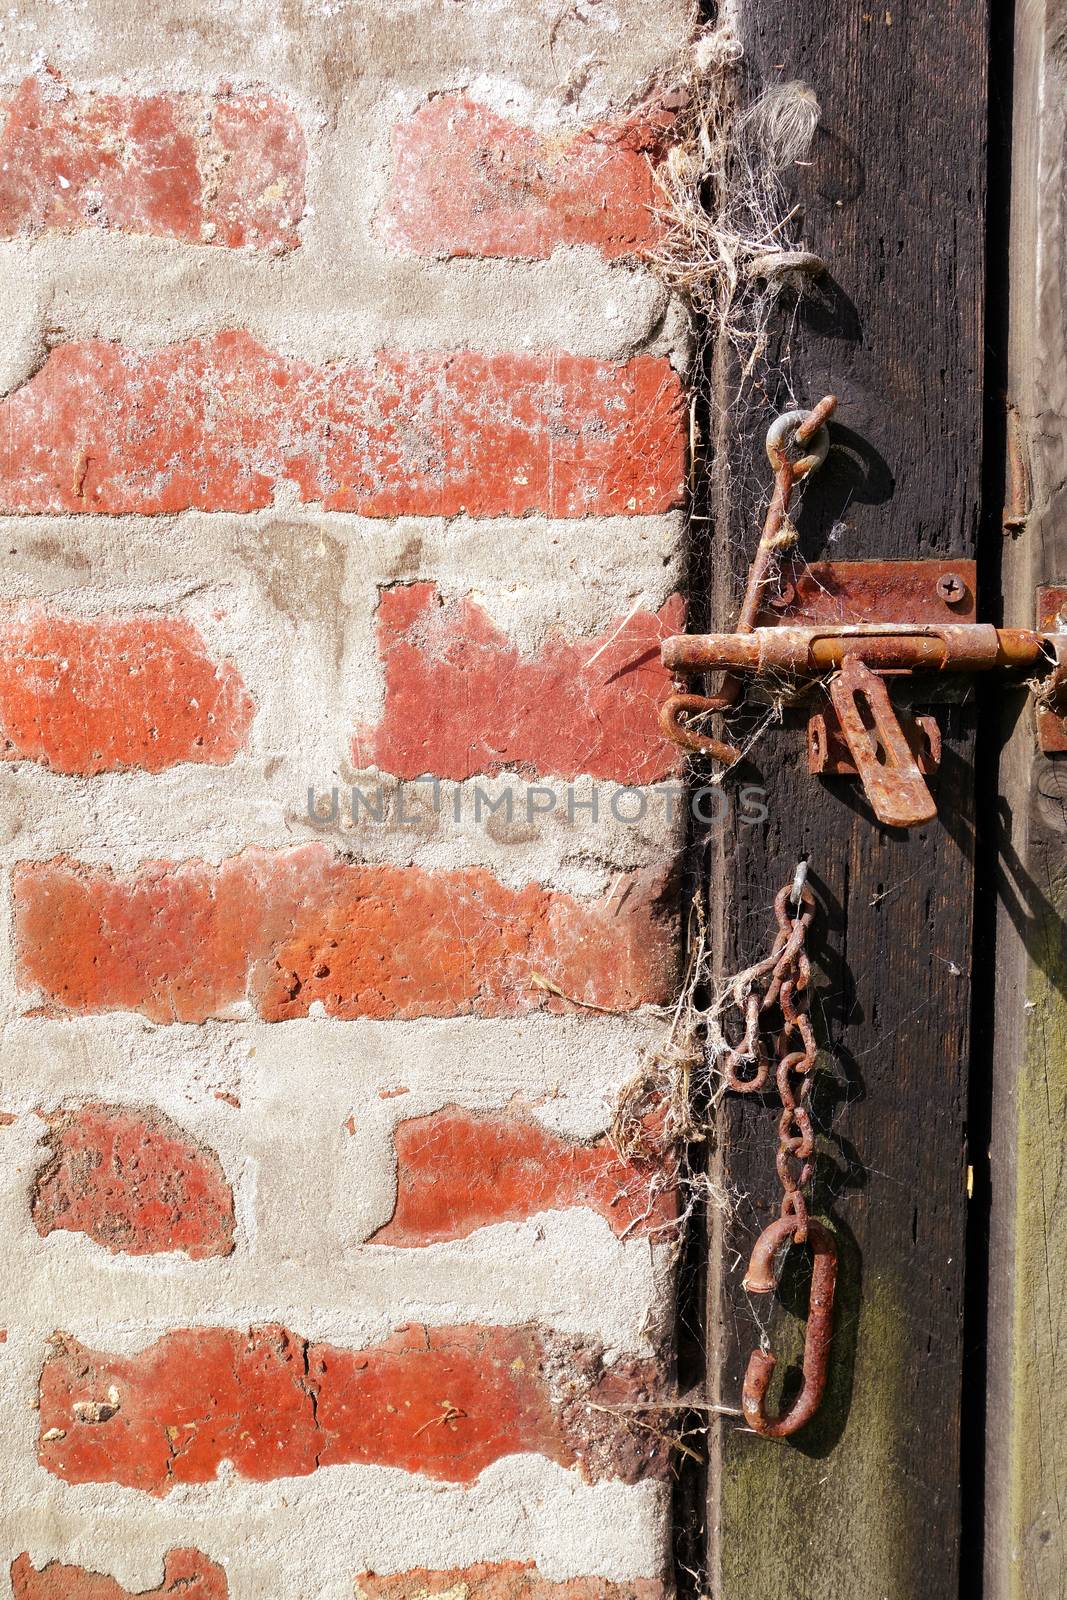 Rough wood door and brick wall by daboost